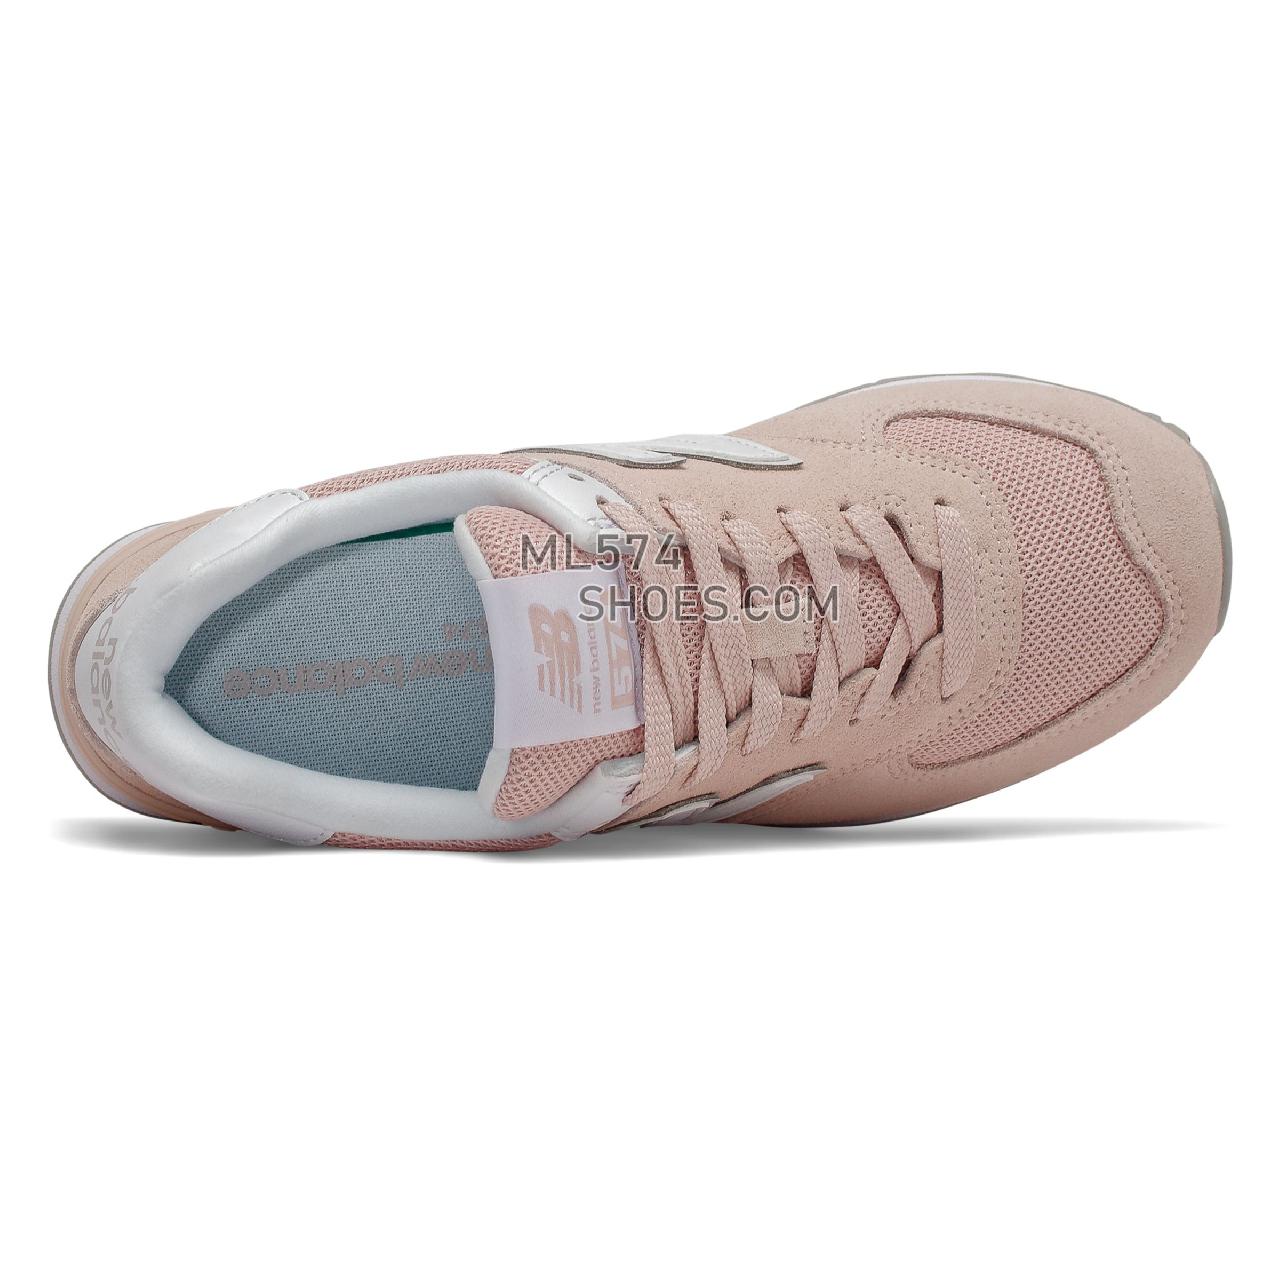 New Balance 574 - Women's Classic Sneakers - Smoked Salt with White - WL574OAB